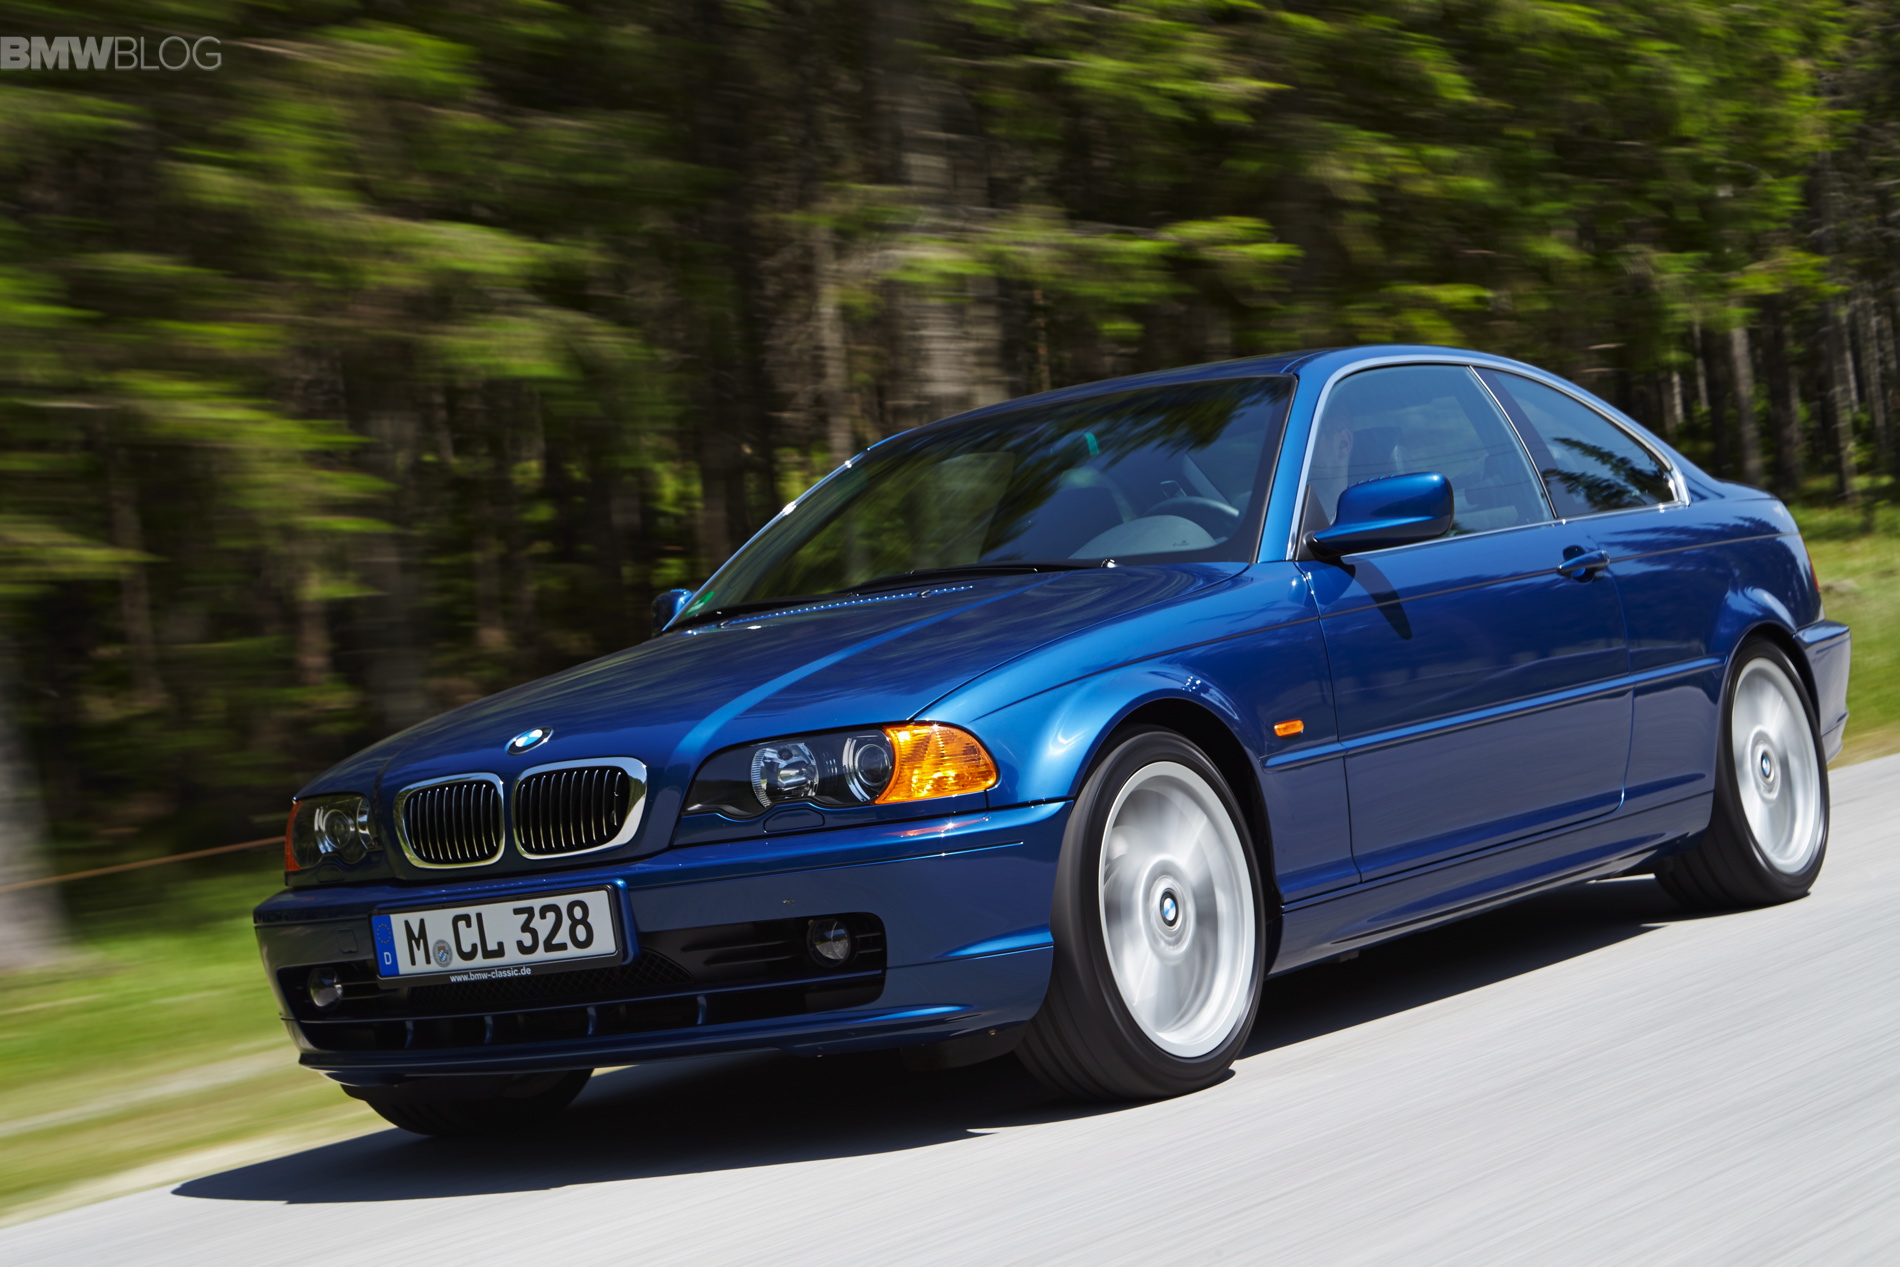 How Did the E46 BMW 3 Series Compete Back in its Day?